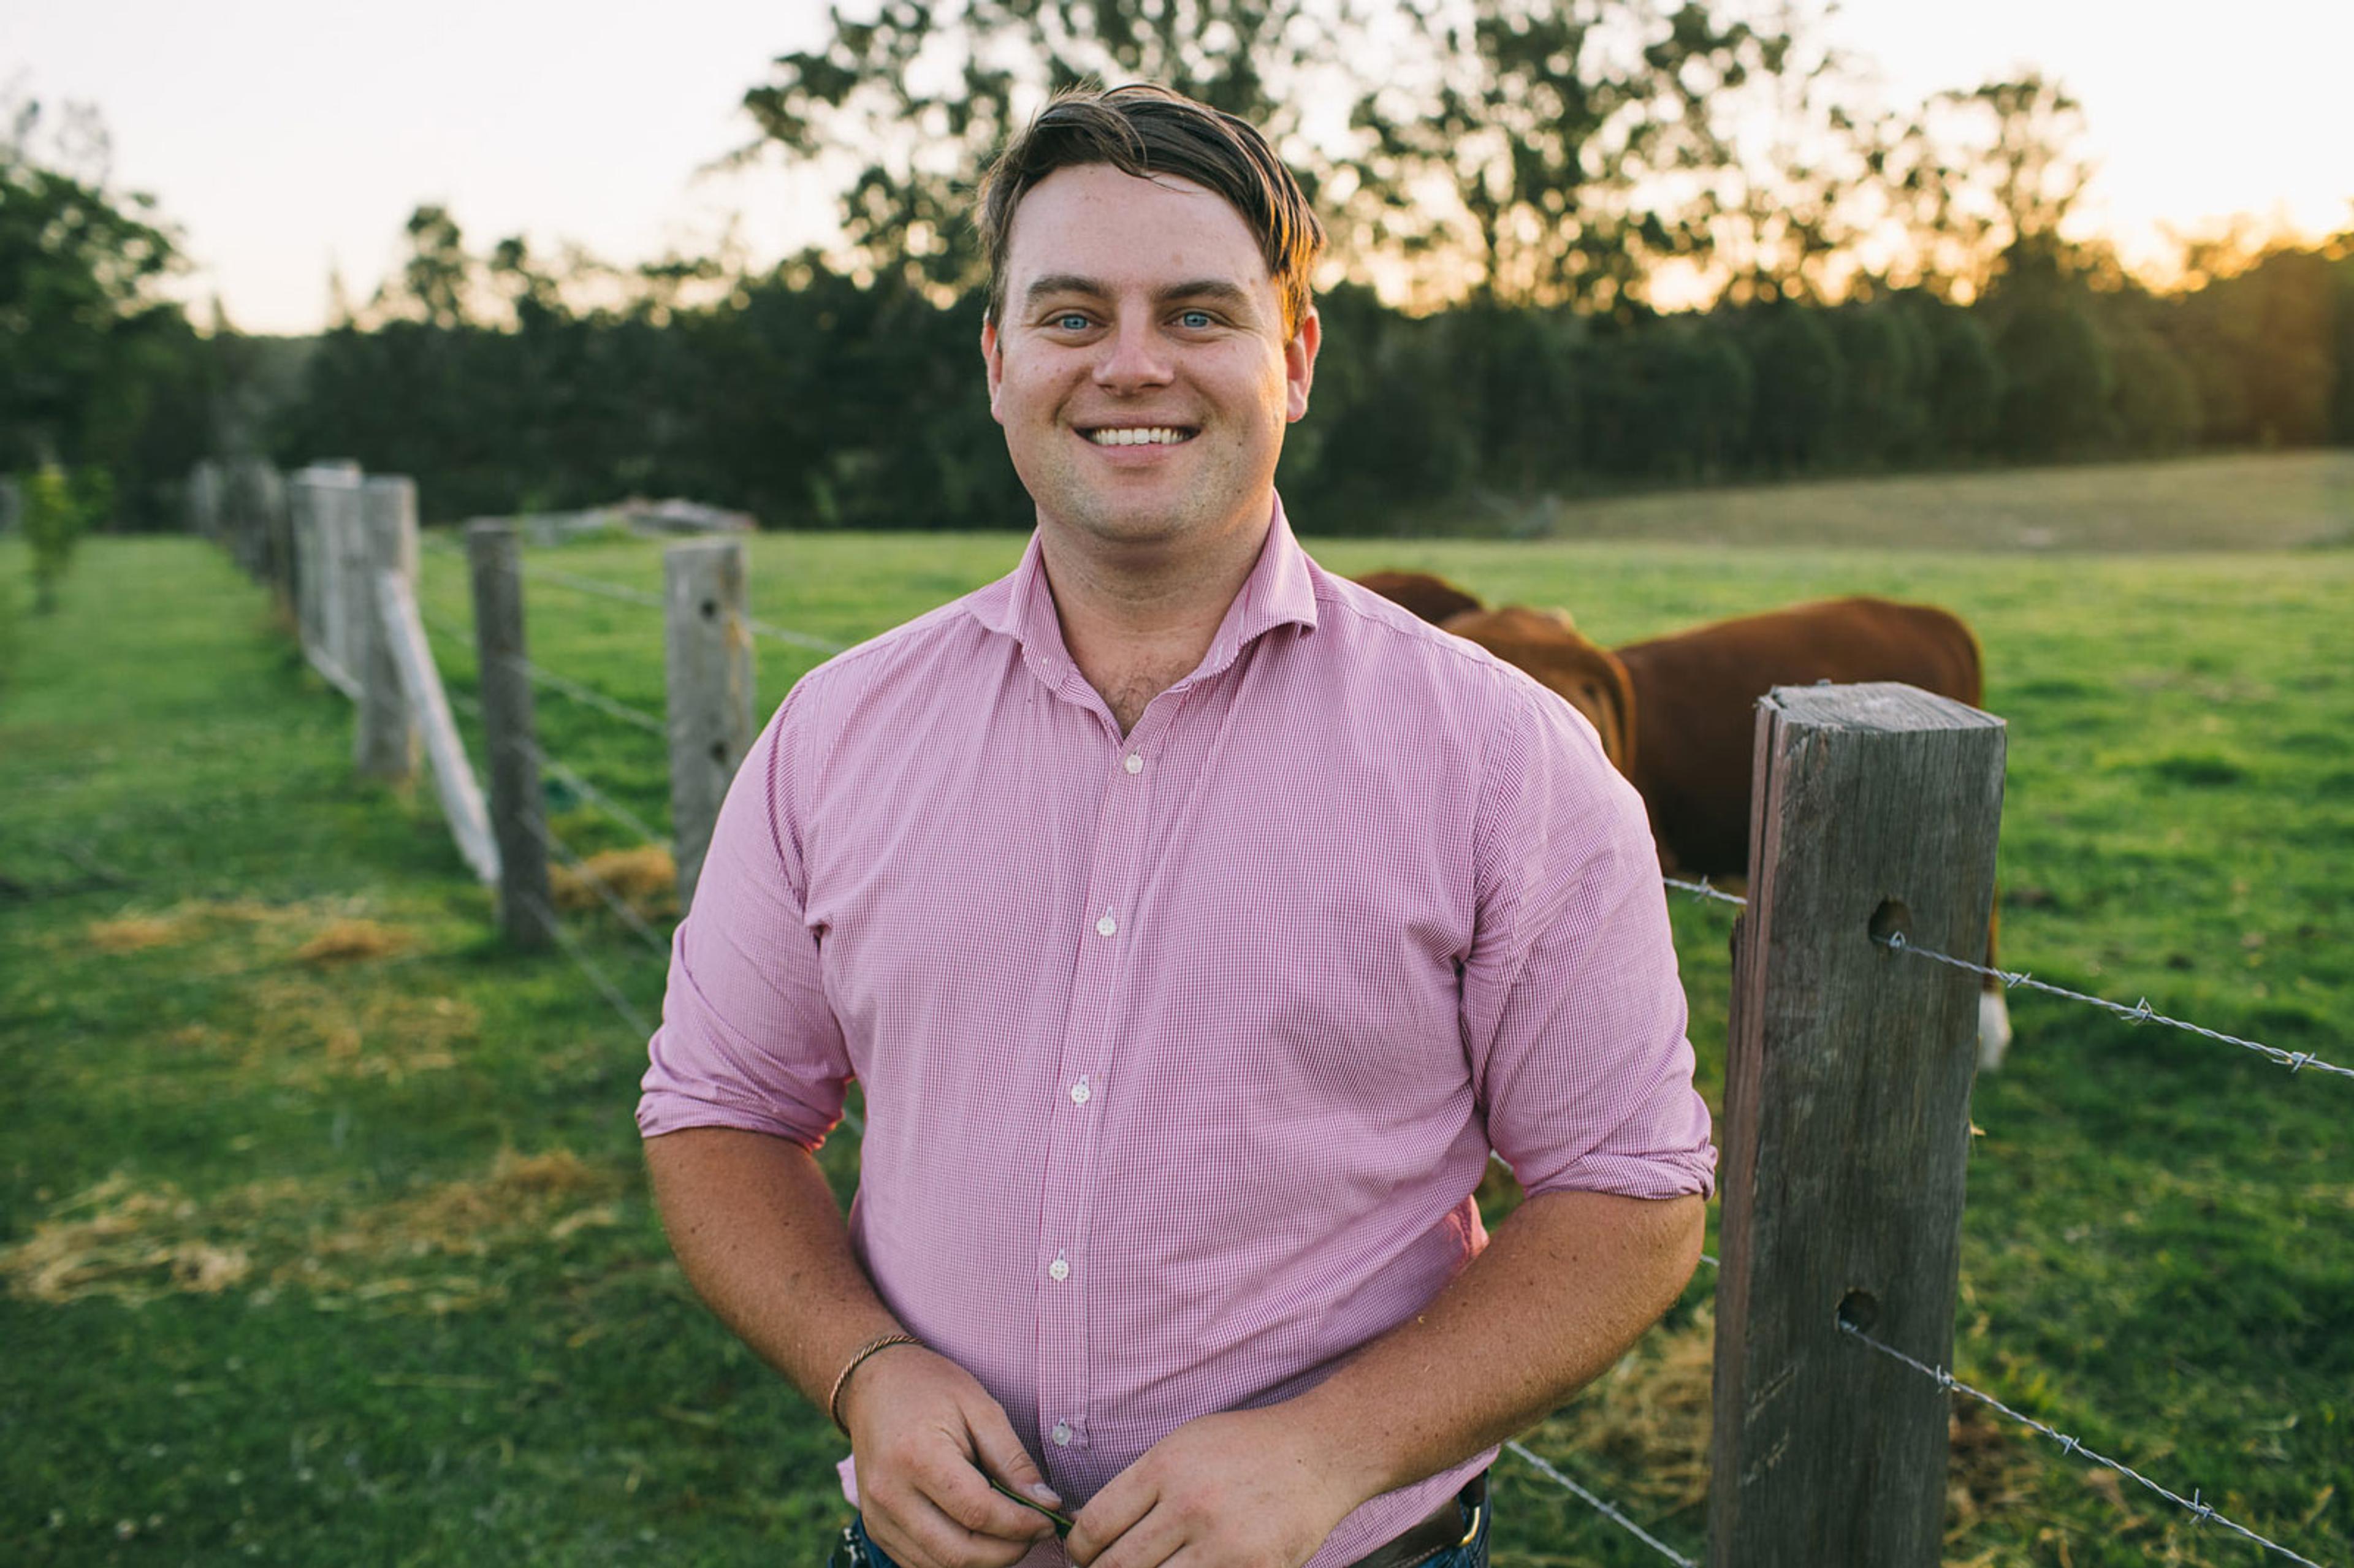 A man in a pink striped short sleeved shirt smiling at the camera. He is standing in a paddock near a wire fence. There are brown cows behind him.